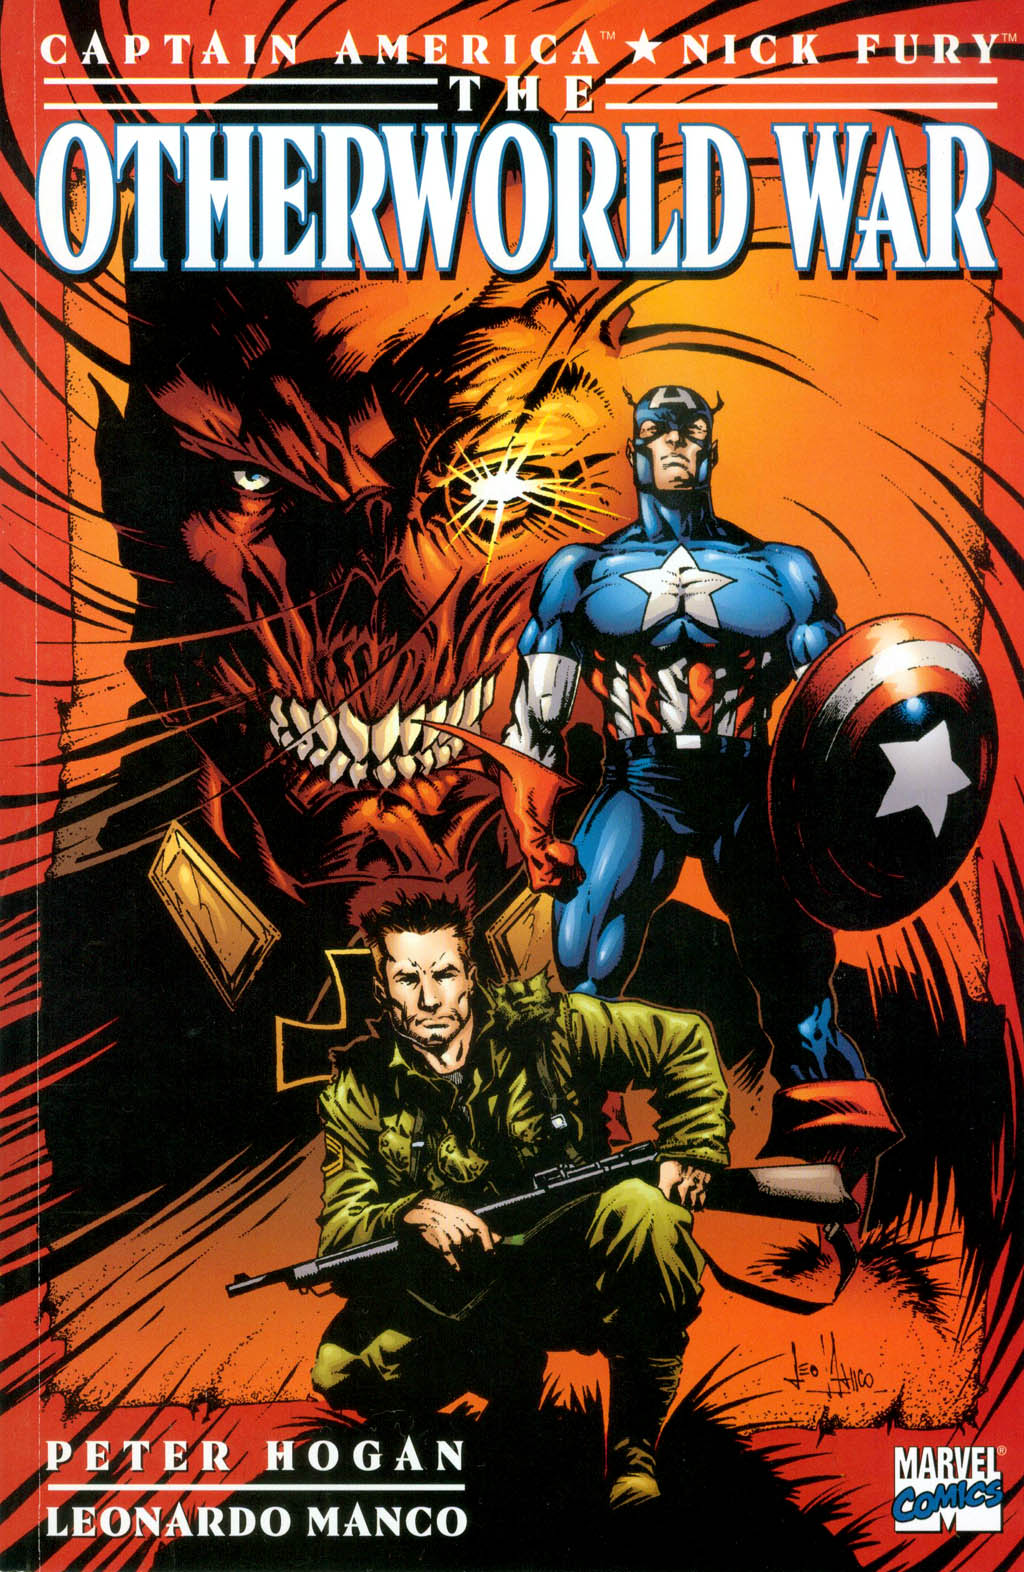 Read online Captain America/Nick Fury: The Otherworld War comic -  Issue # Full - 1